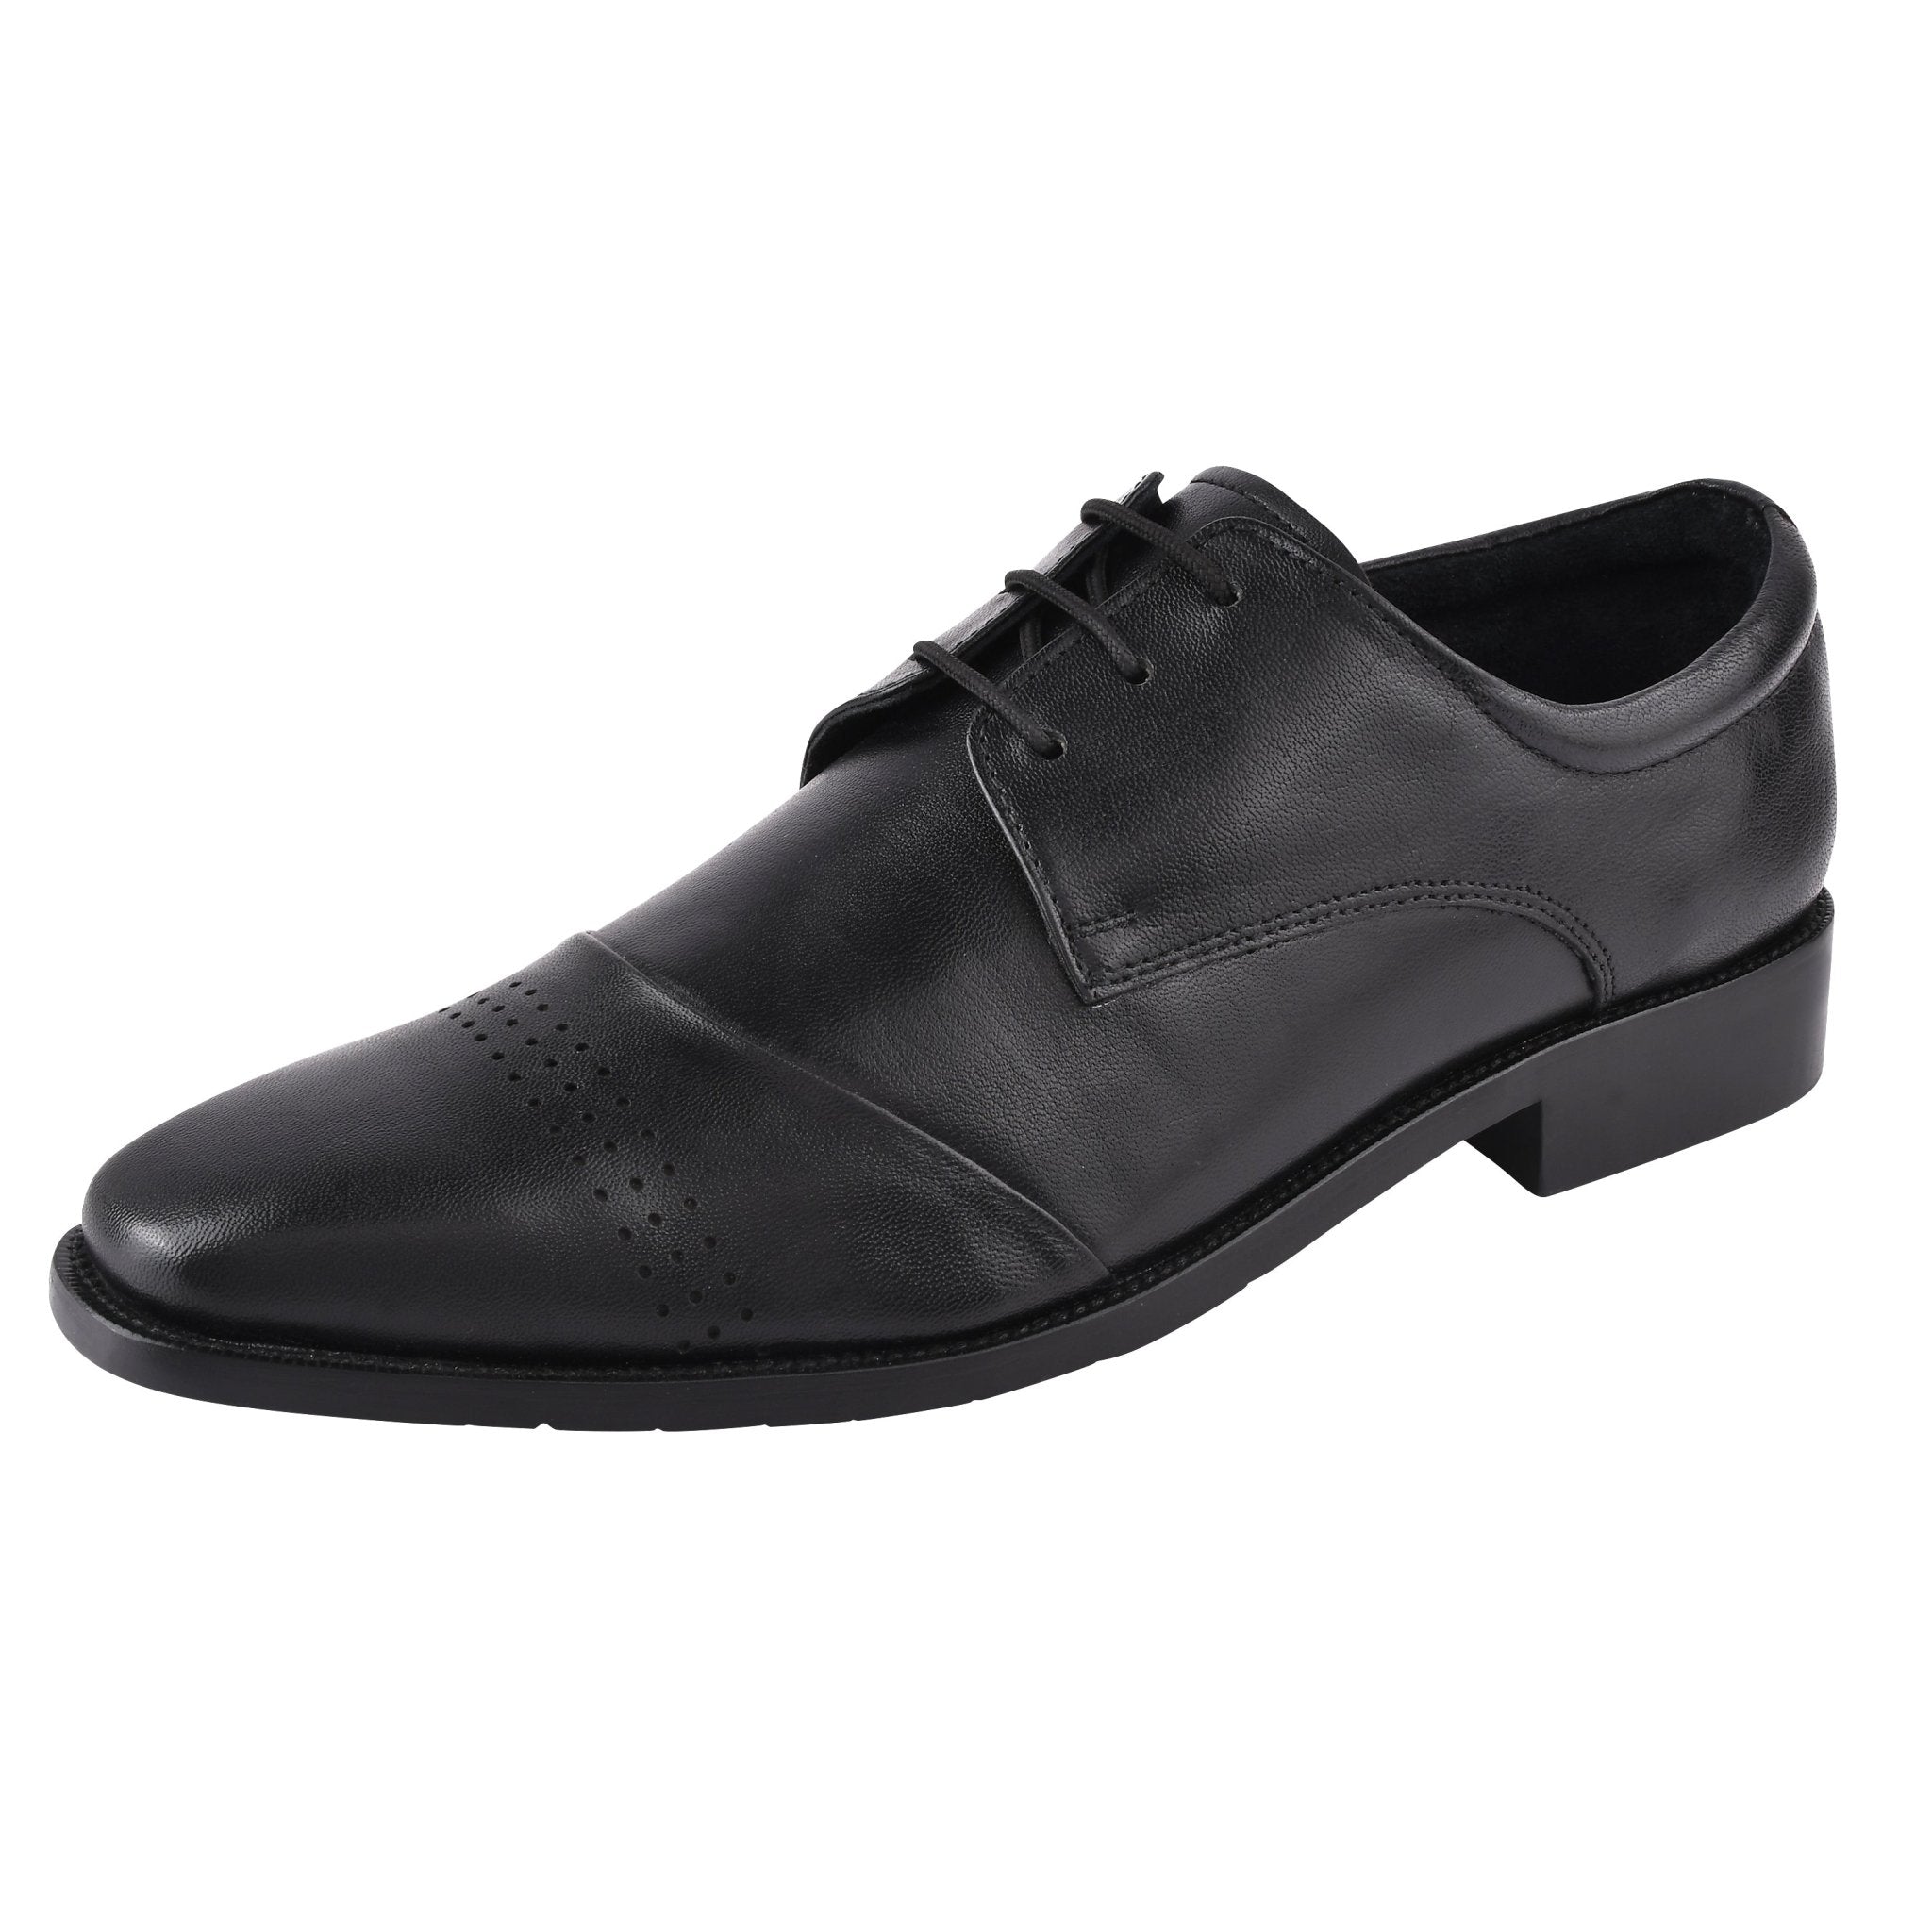 Zapato Leather Oxford Style Dress Shoes